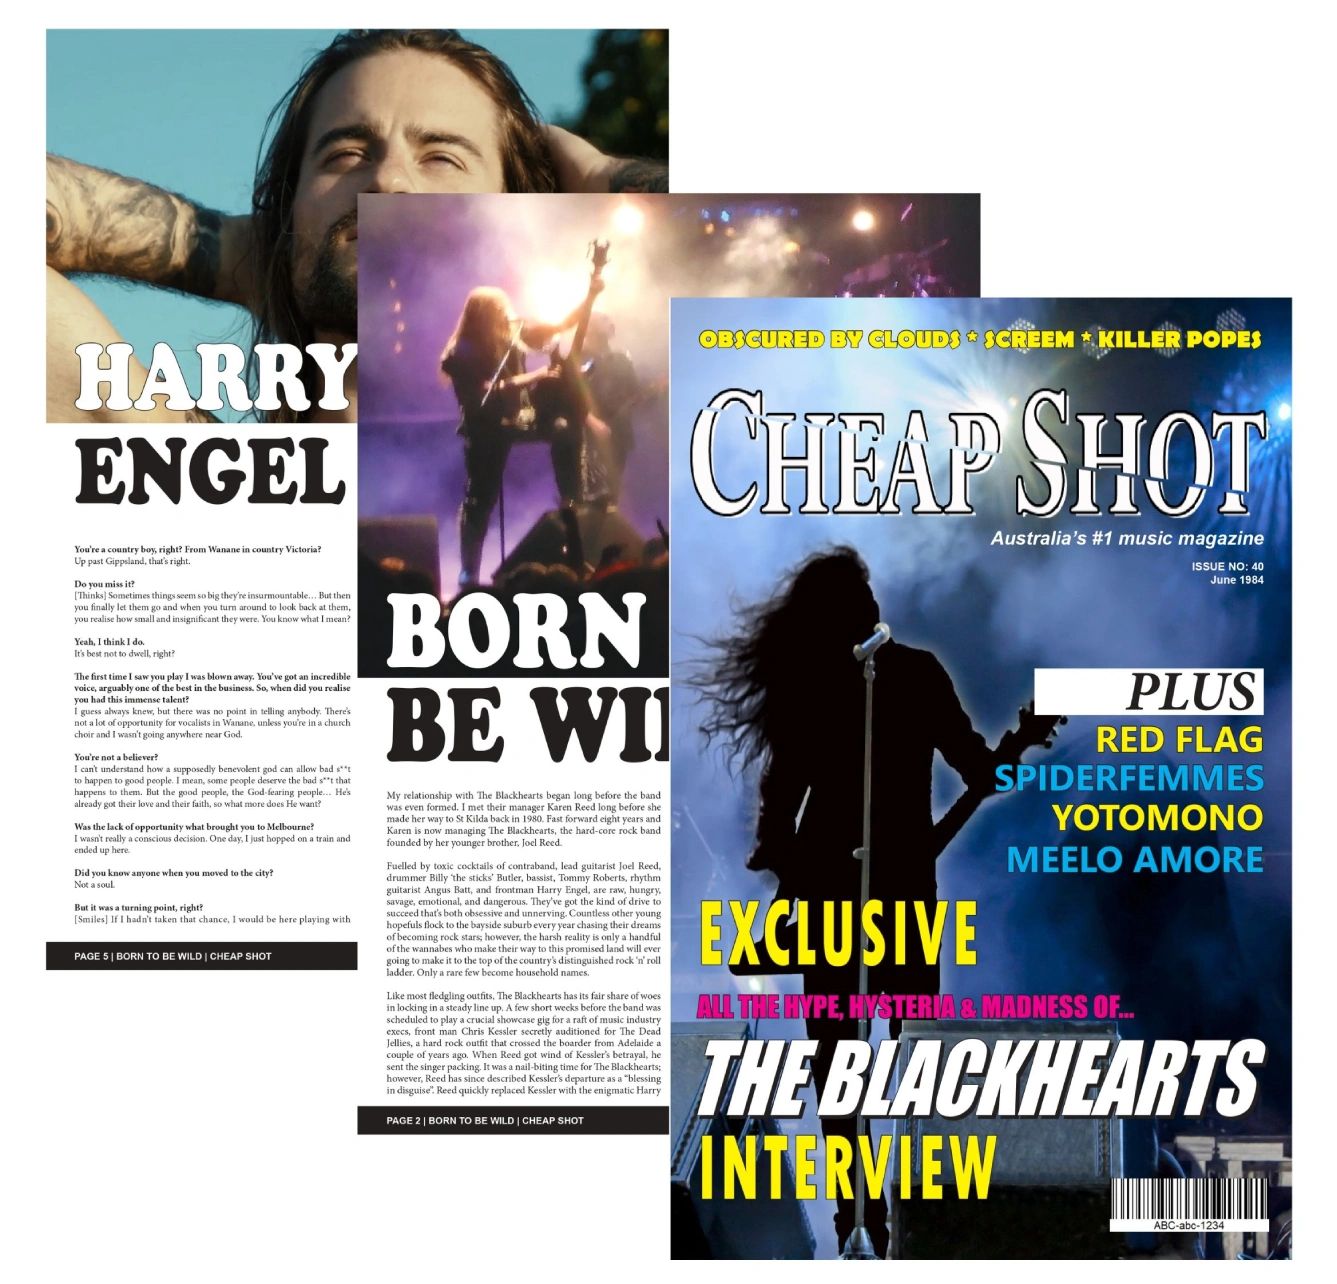 The cover of Cheap Shot music magazine and two interior pages with colour photos and the interview.